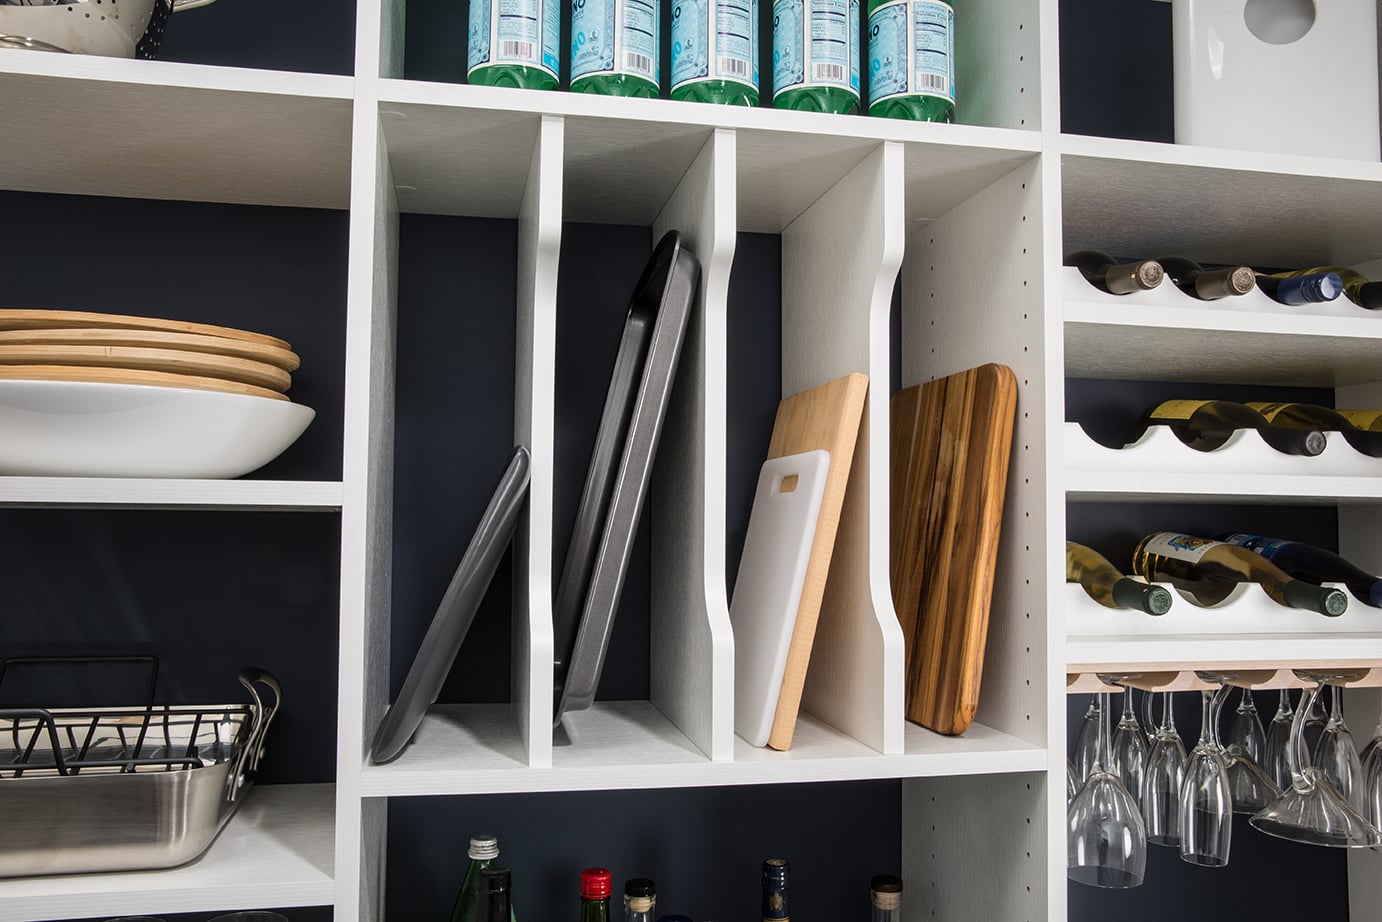 Cutting boards placed in compartments in kitchen shelves